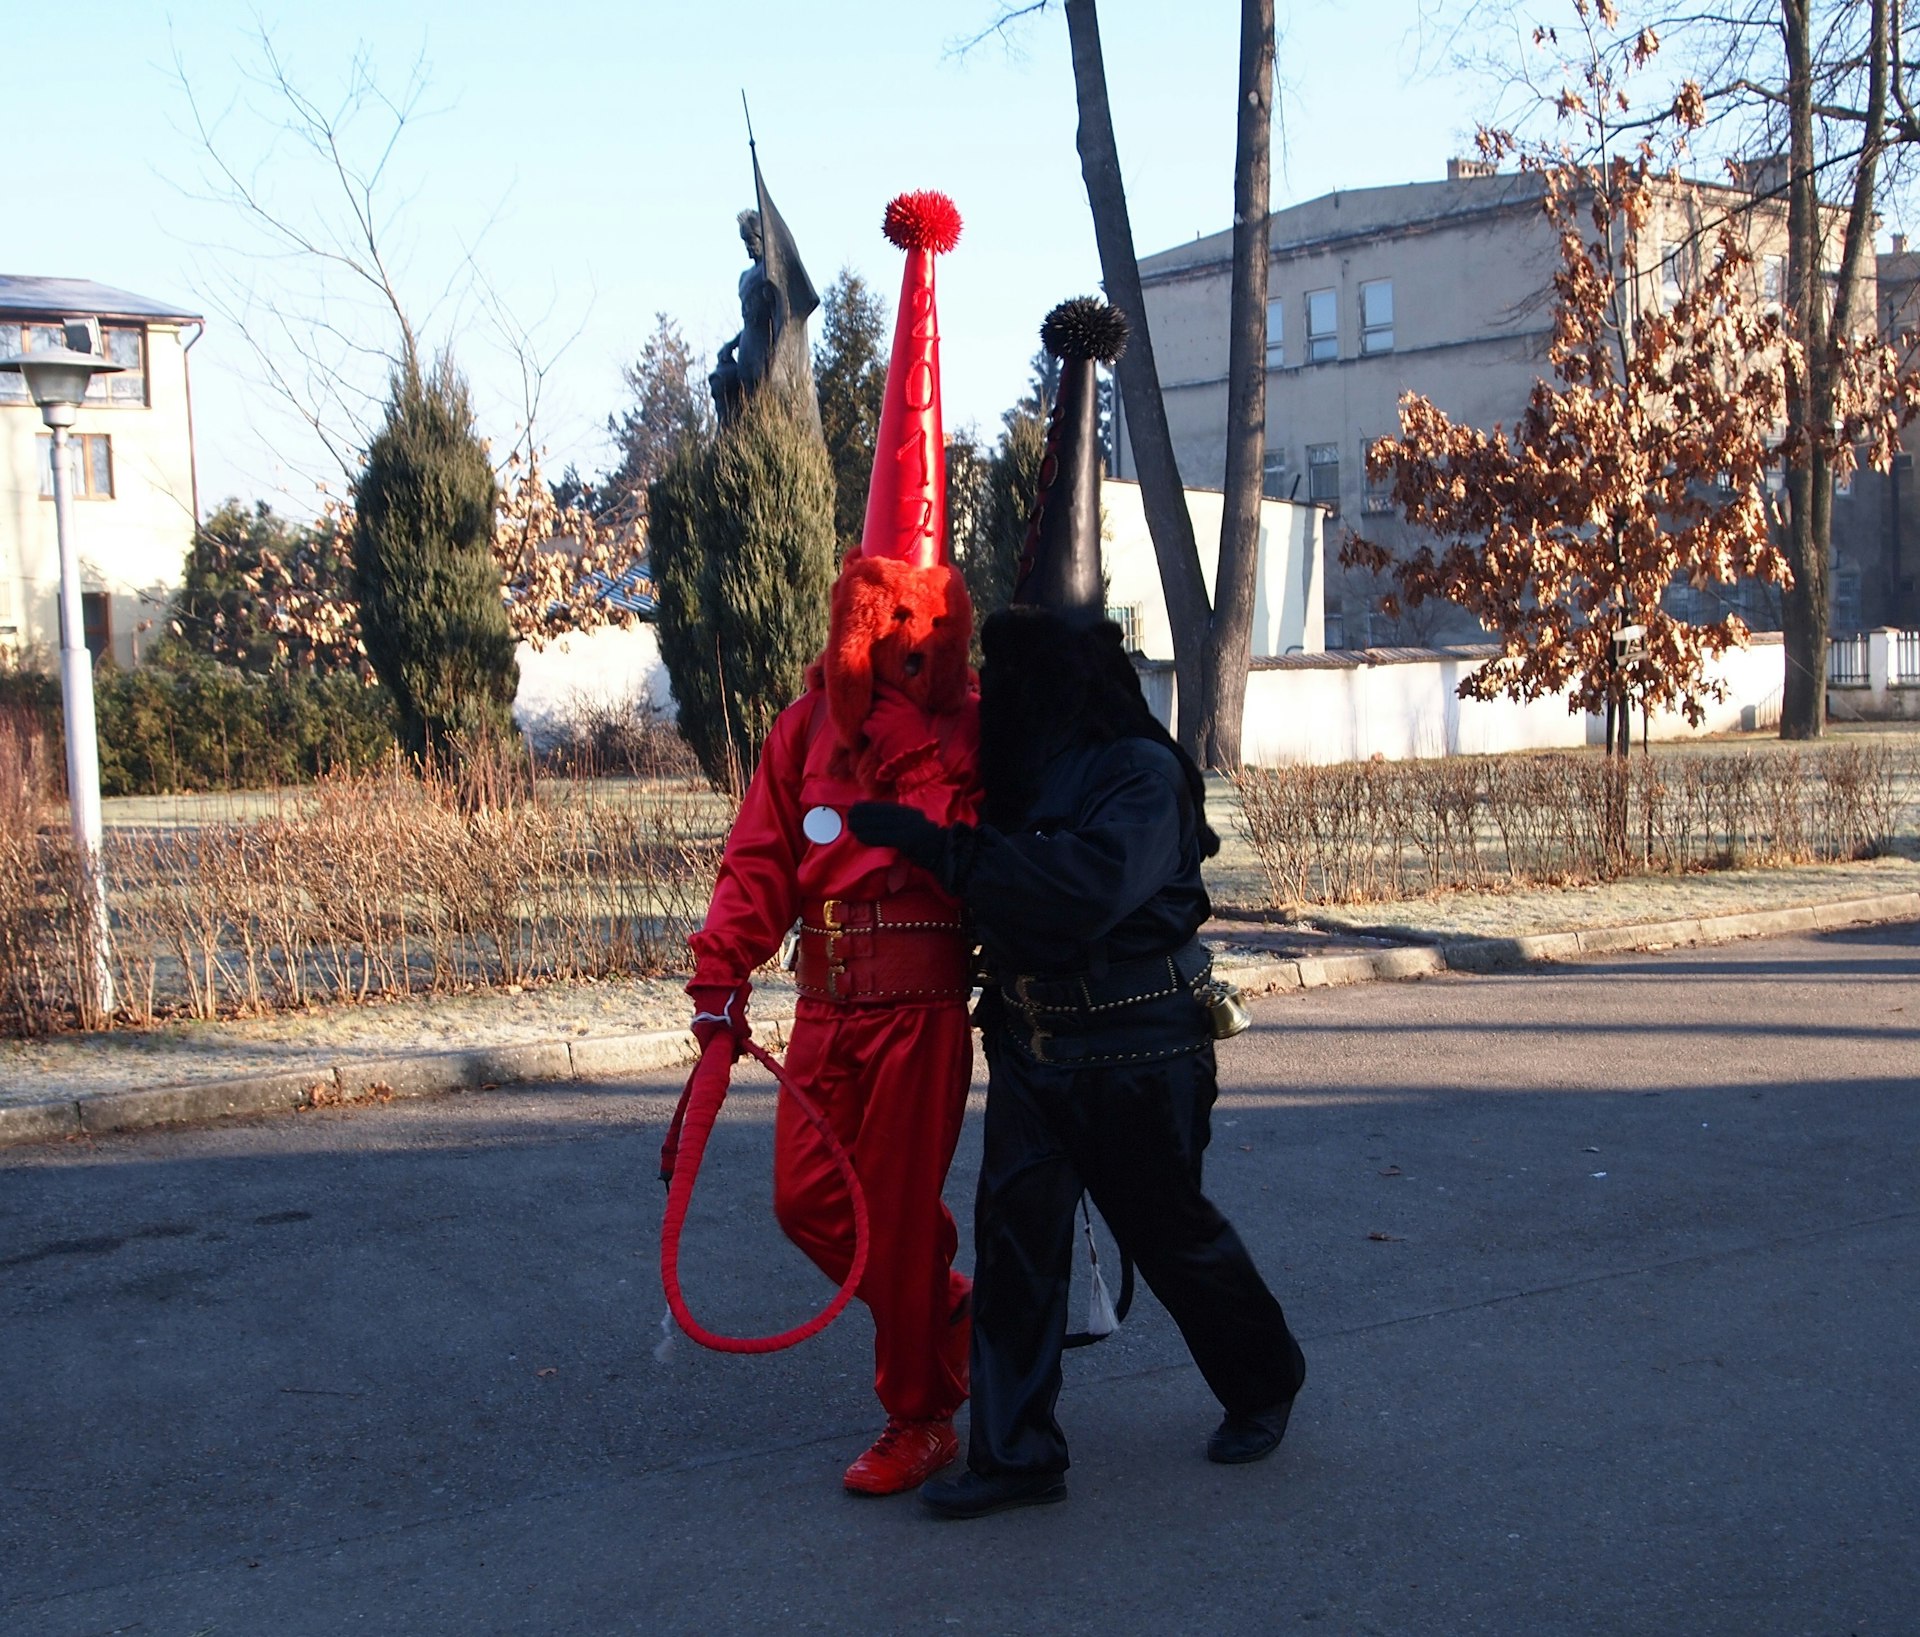 One person dressed head-to-toe in red, and another in black, wear pointy hats and hold whips